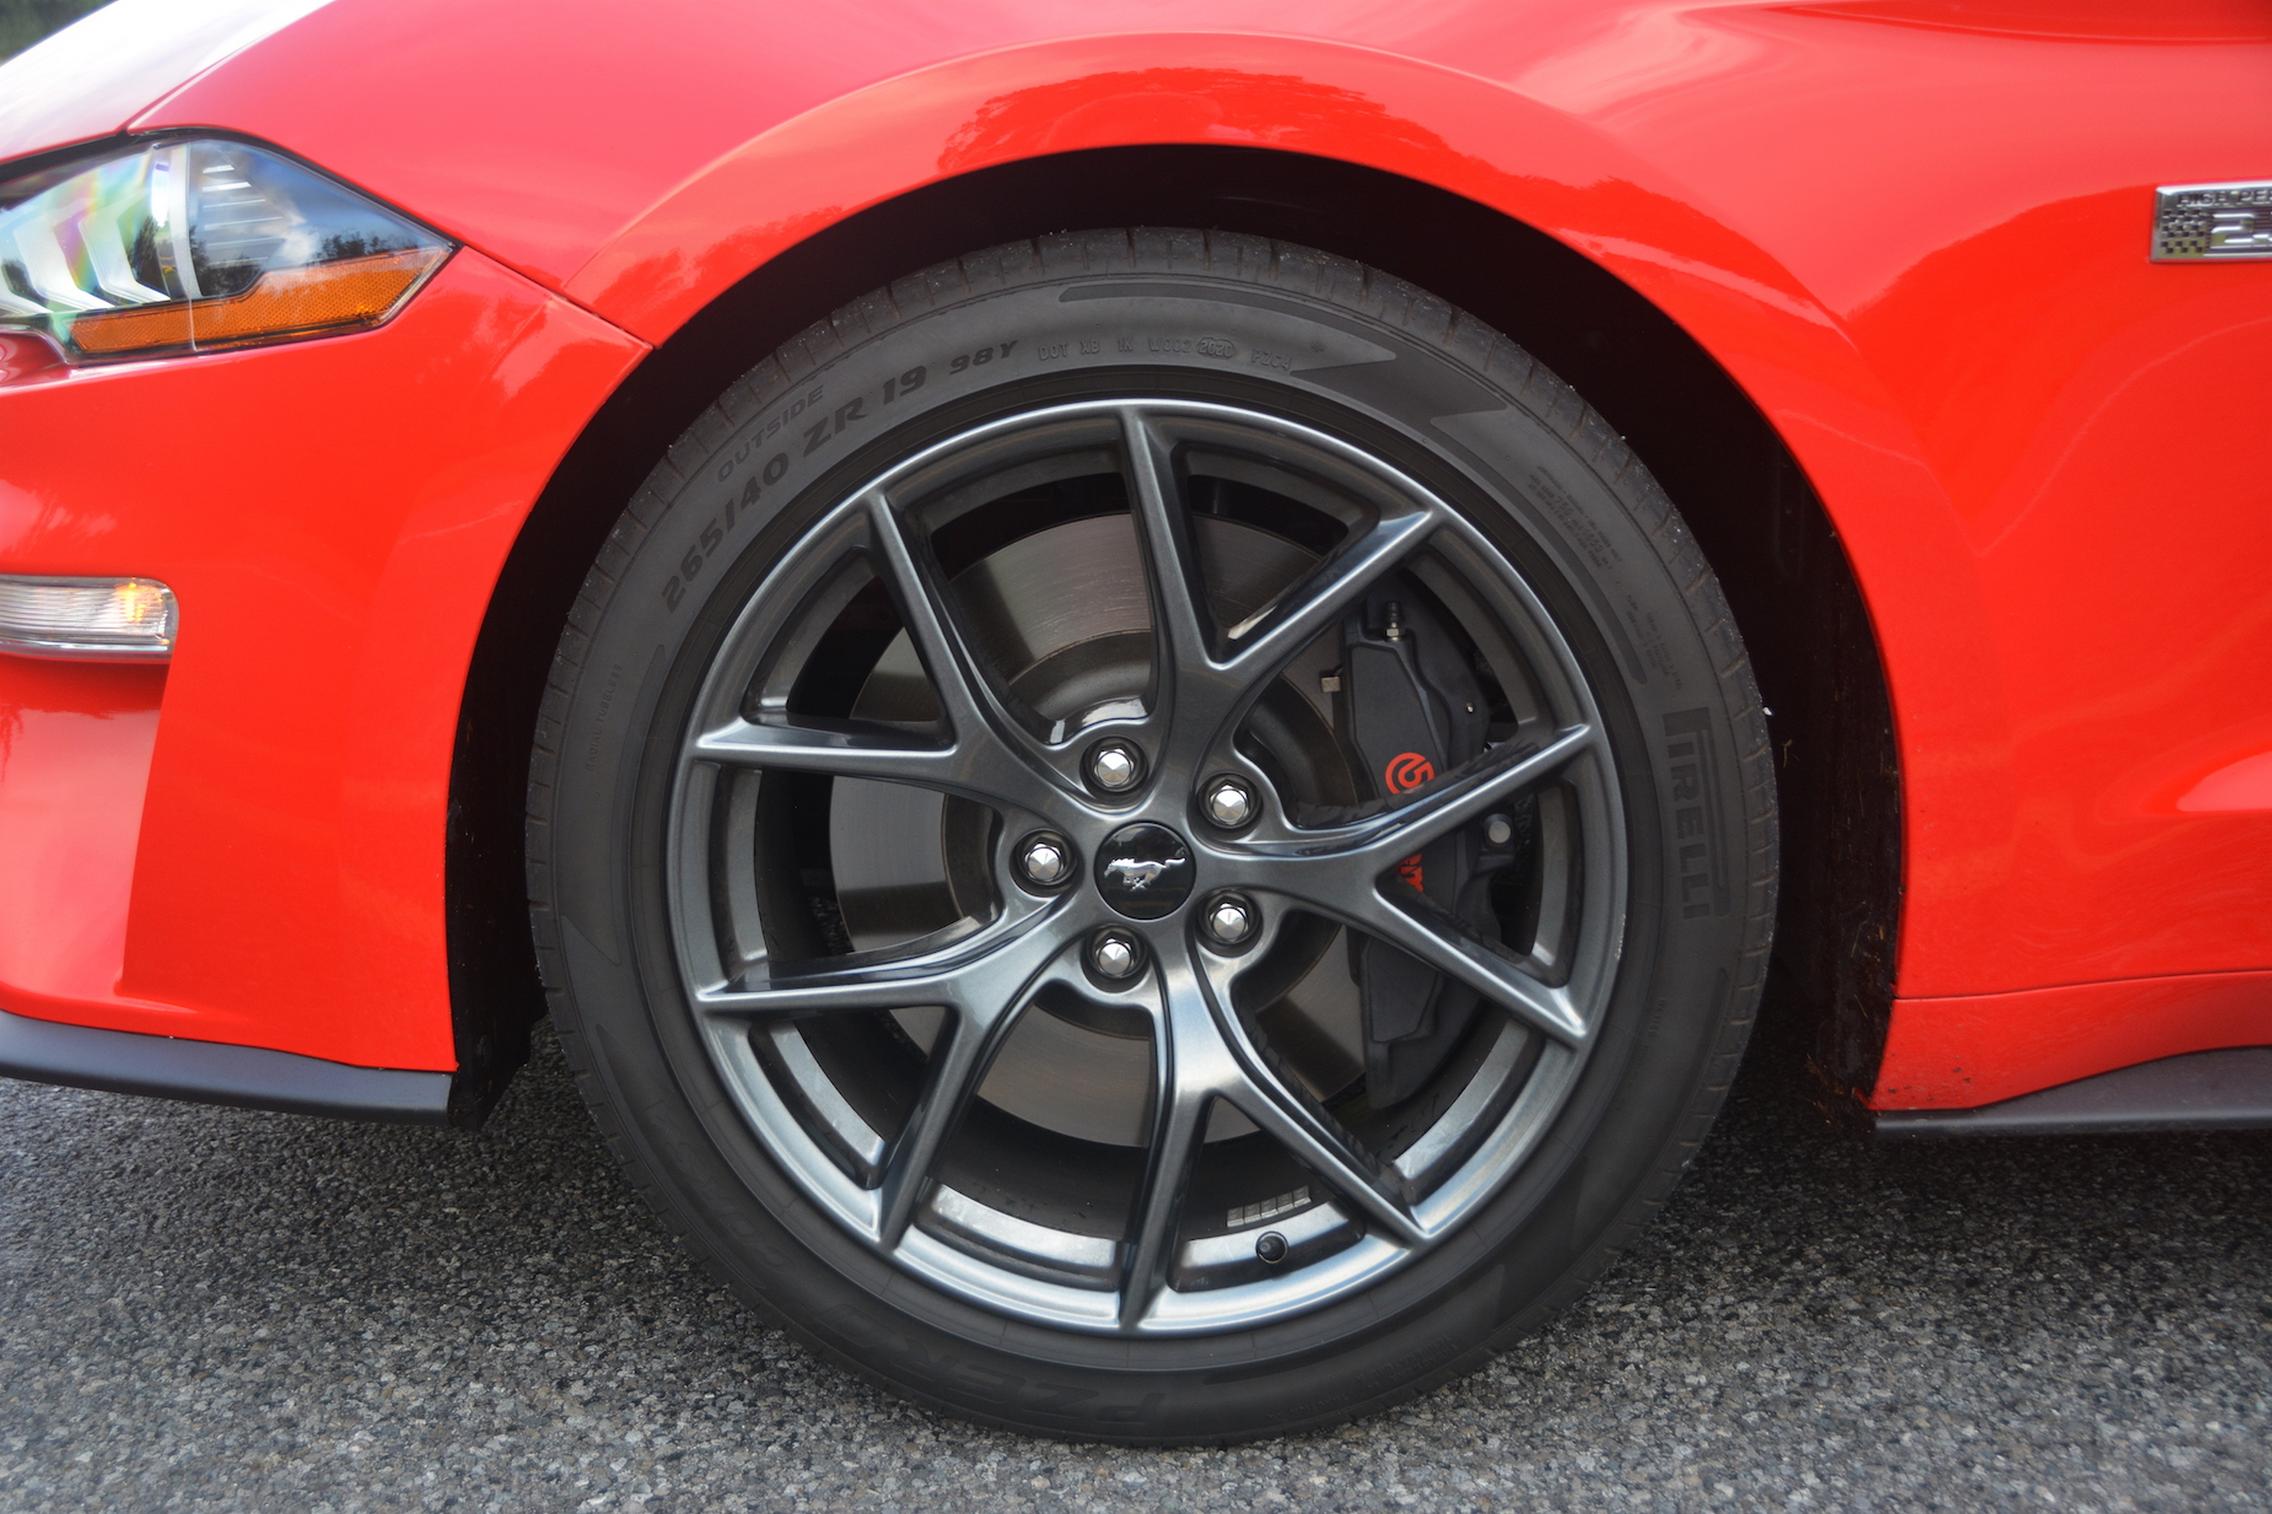 2021 Ford Mustang EcoBoost wheels